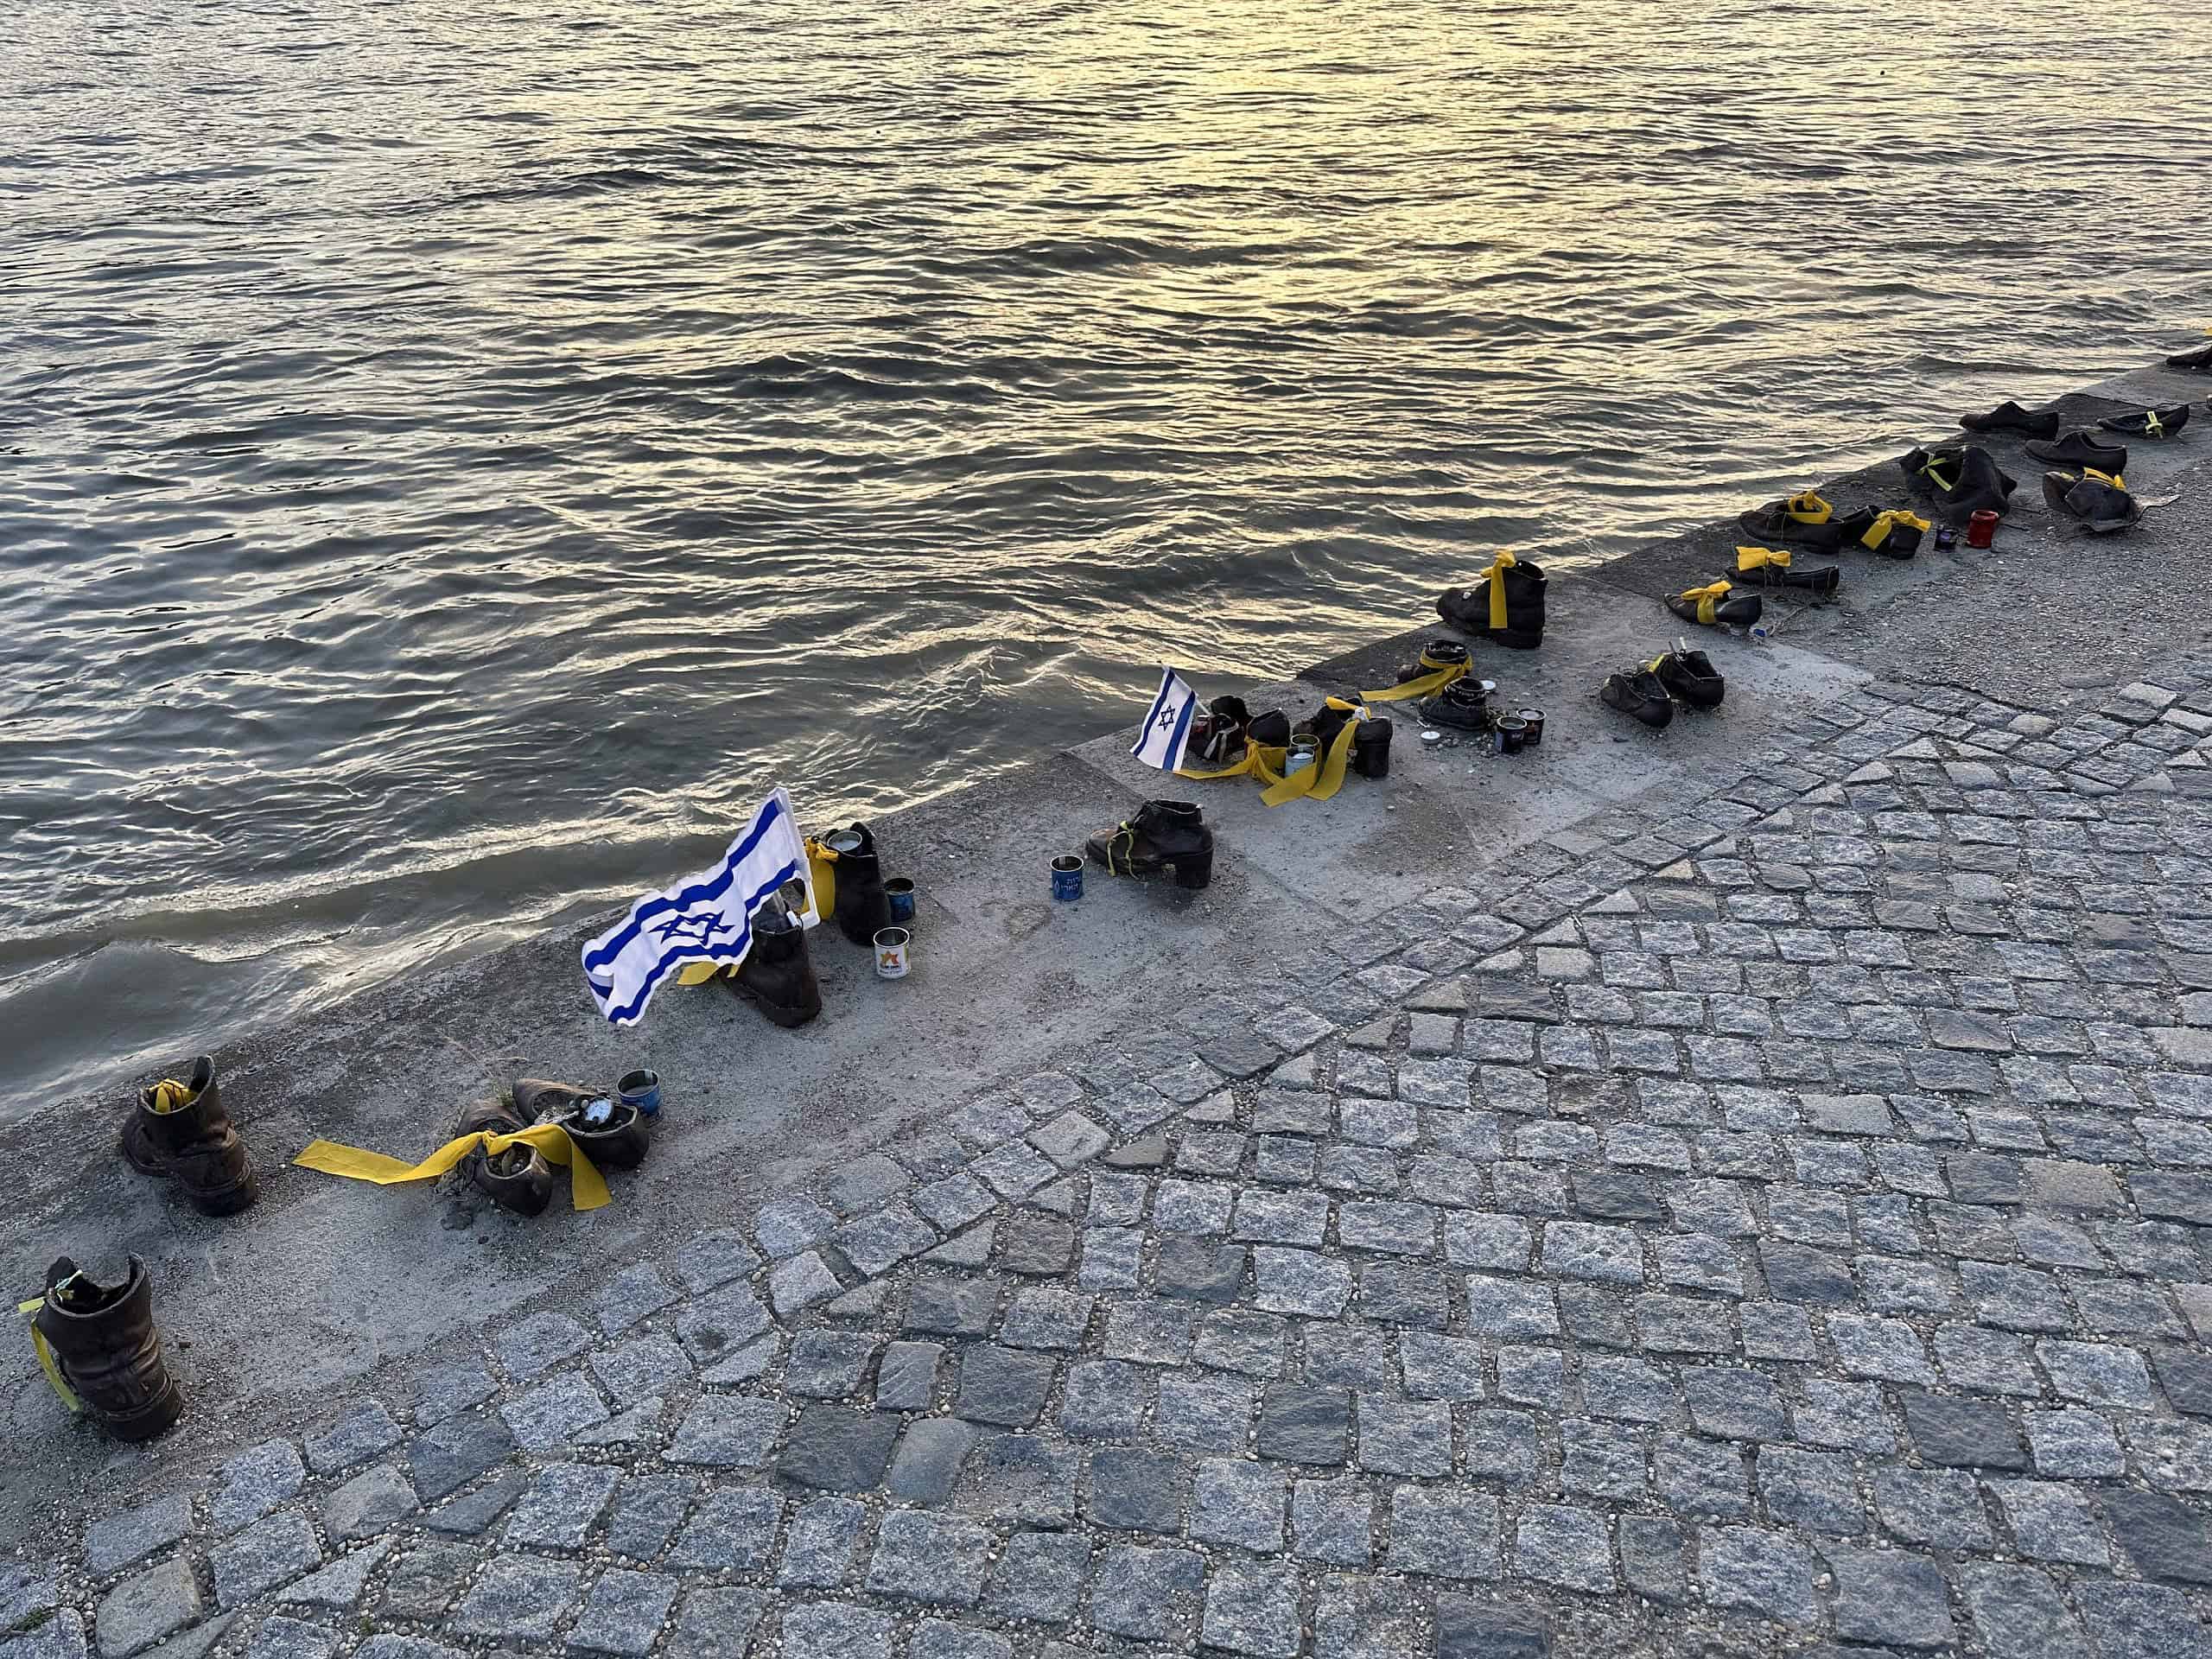 Budapest, Hungary, “Shoes in Danube River”